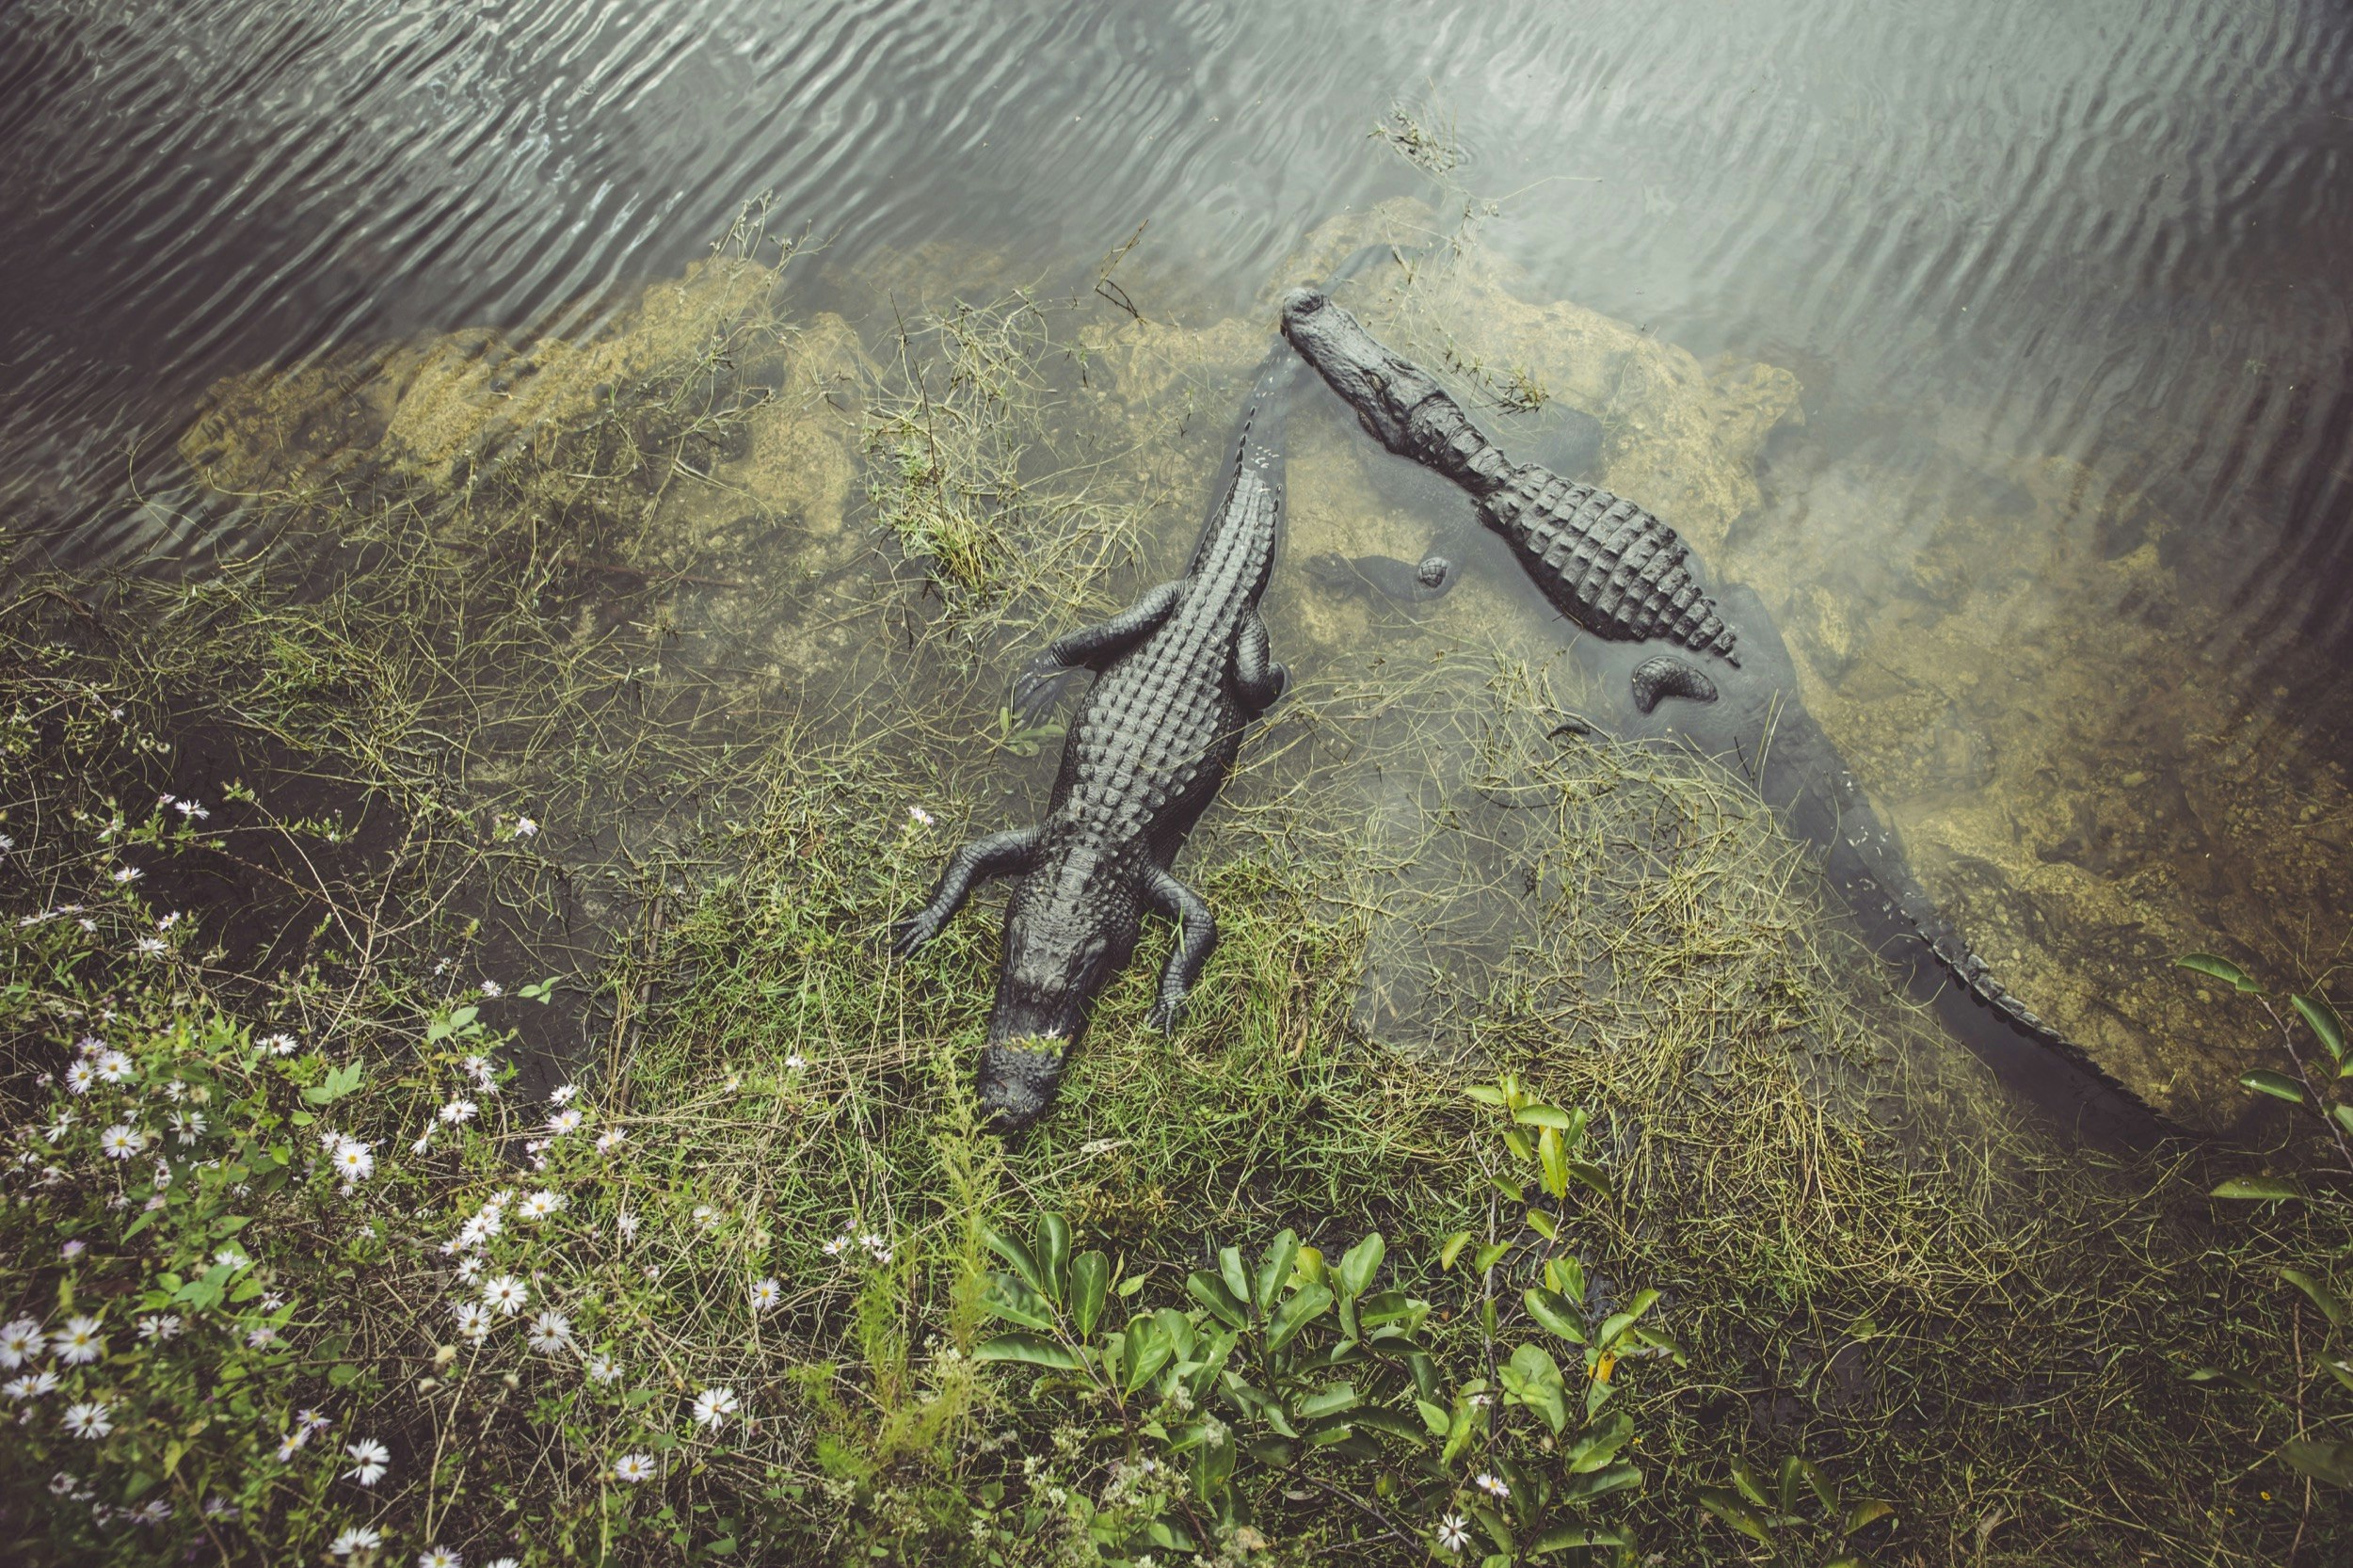 Looking down on two alligators floating in some marshy water in Florida